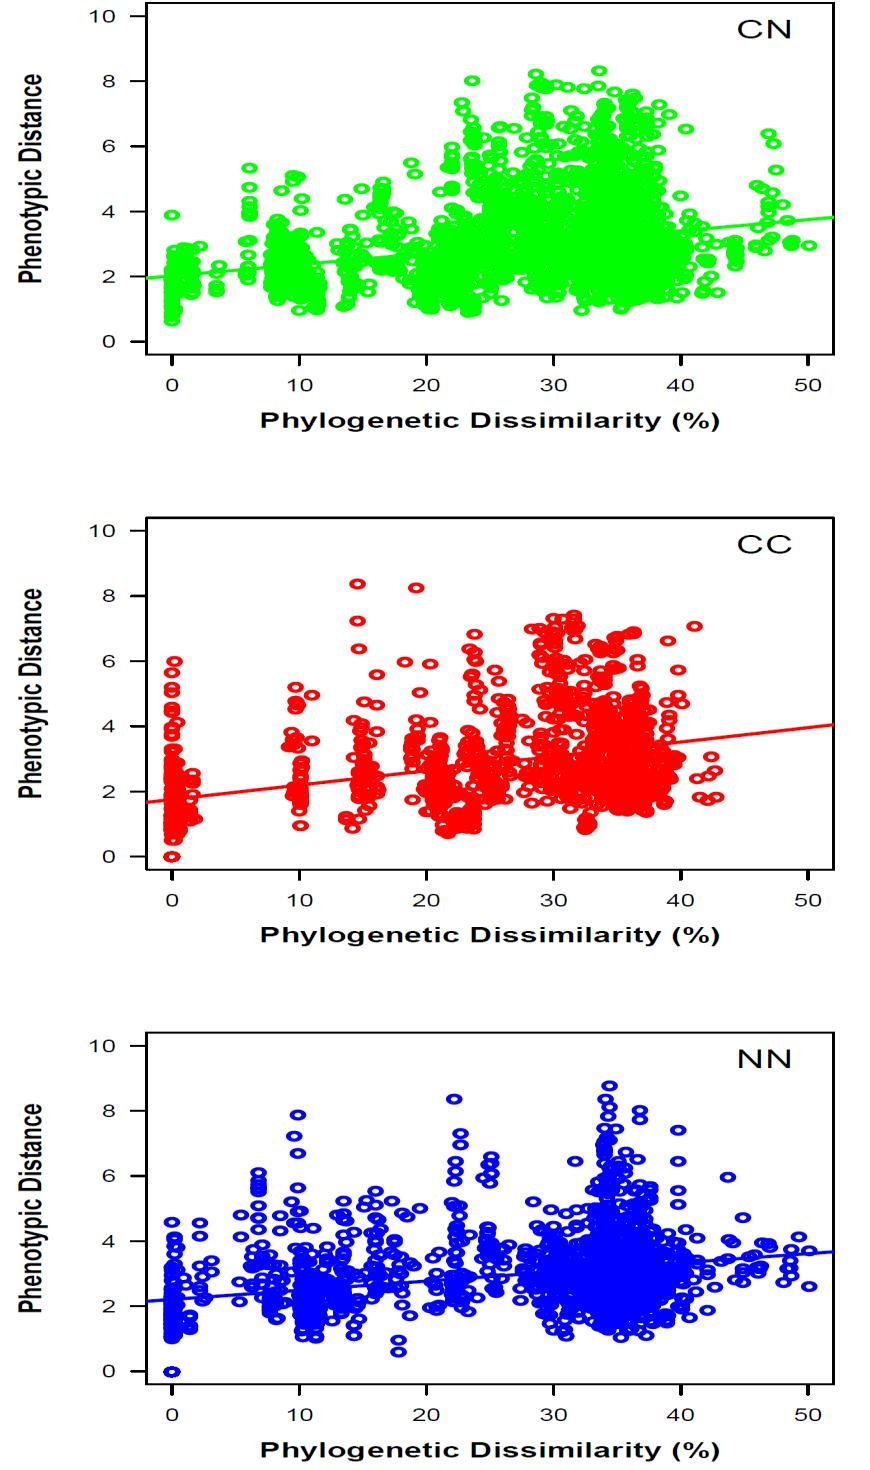 Phenotype and phylogeny are correlated